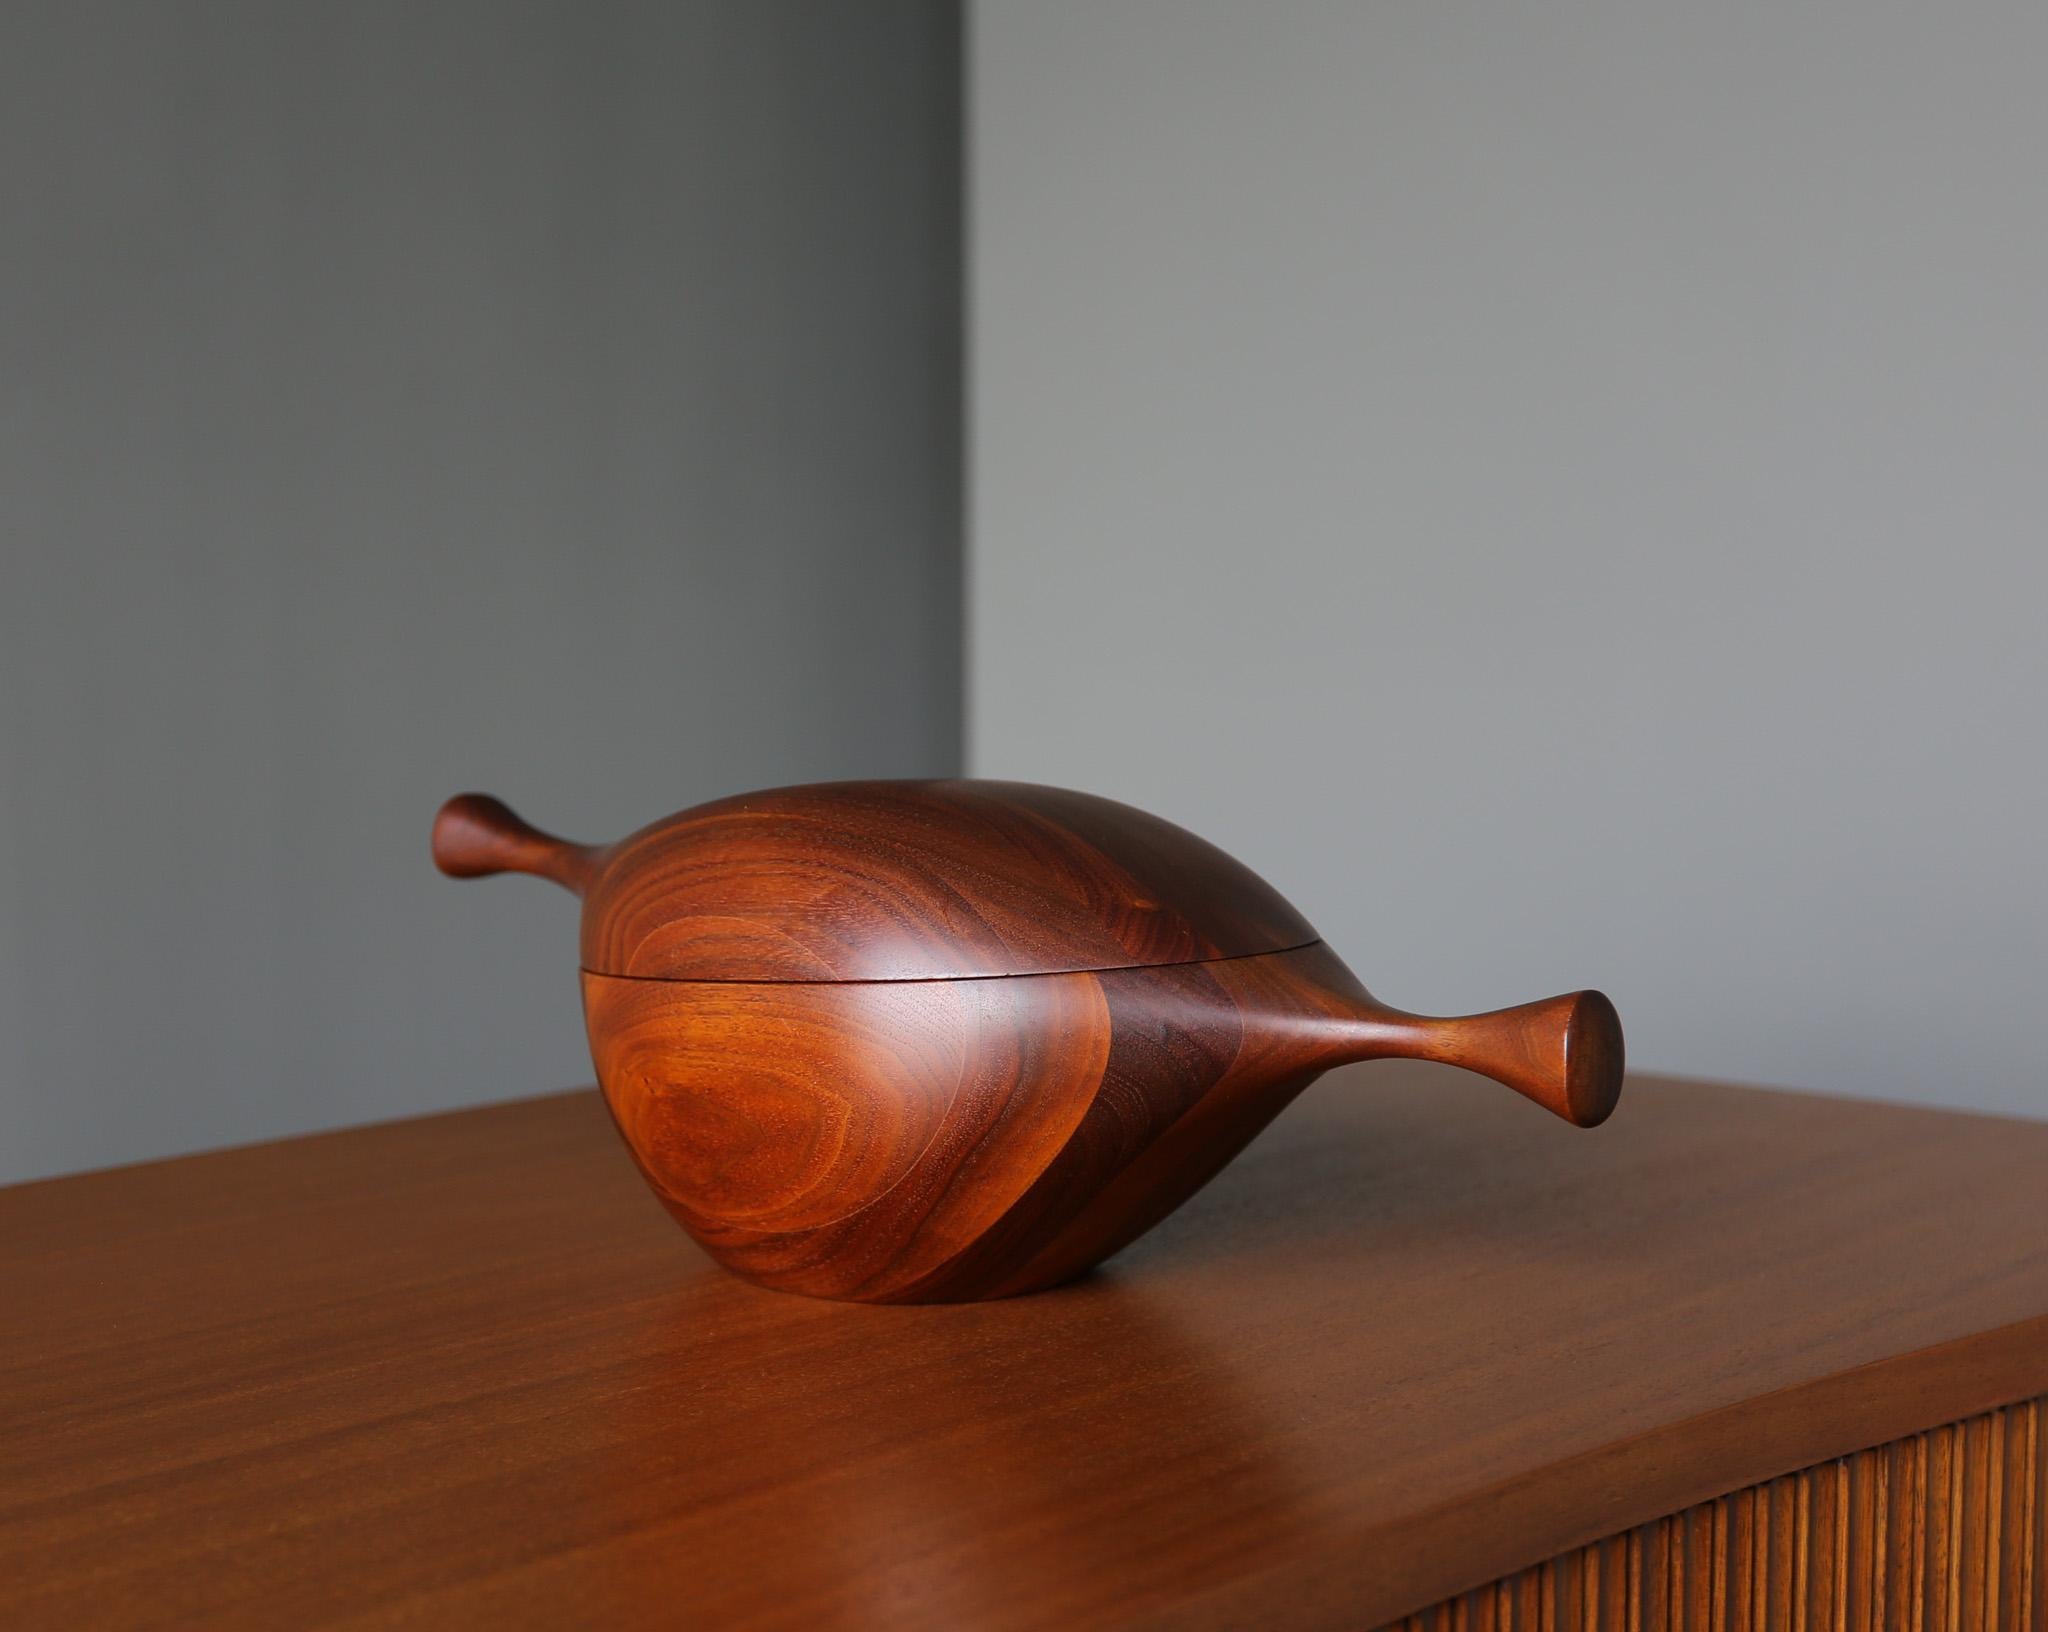 Daniel Loomis Valenza Handcrafted Walnut Covered Bowl,  c.1960 For Sale 2